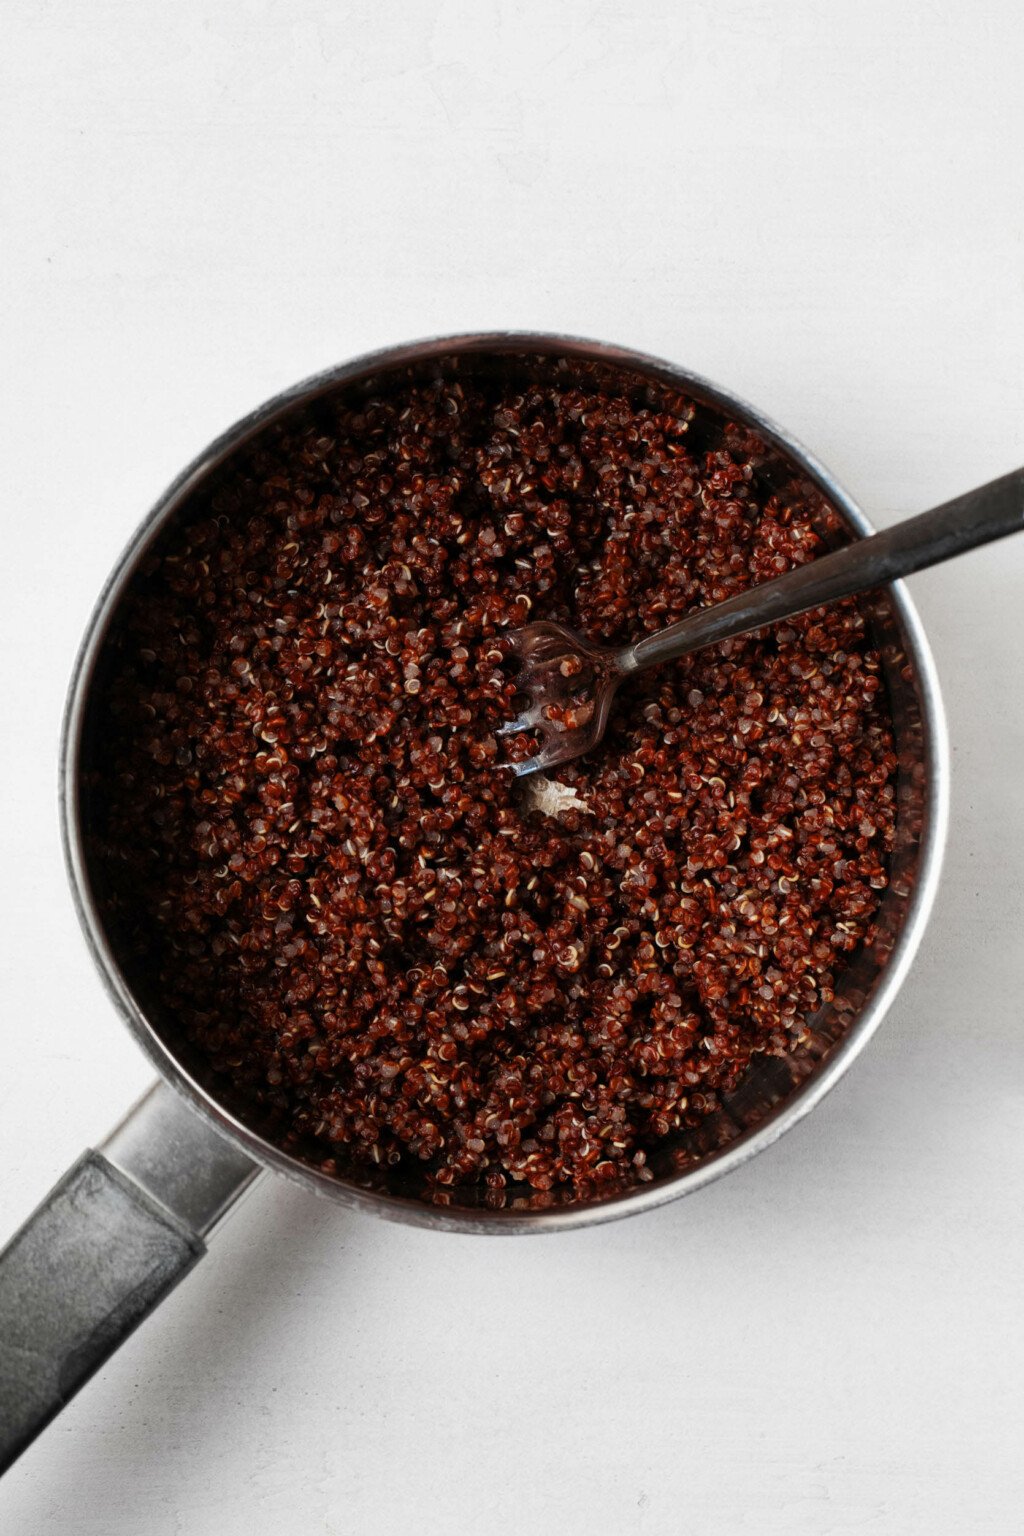 A stainless steel saucepan is filled with fluffy, freshly cooked red quinoa.